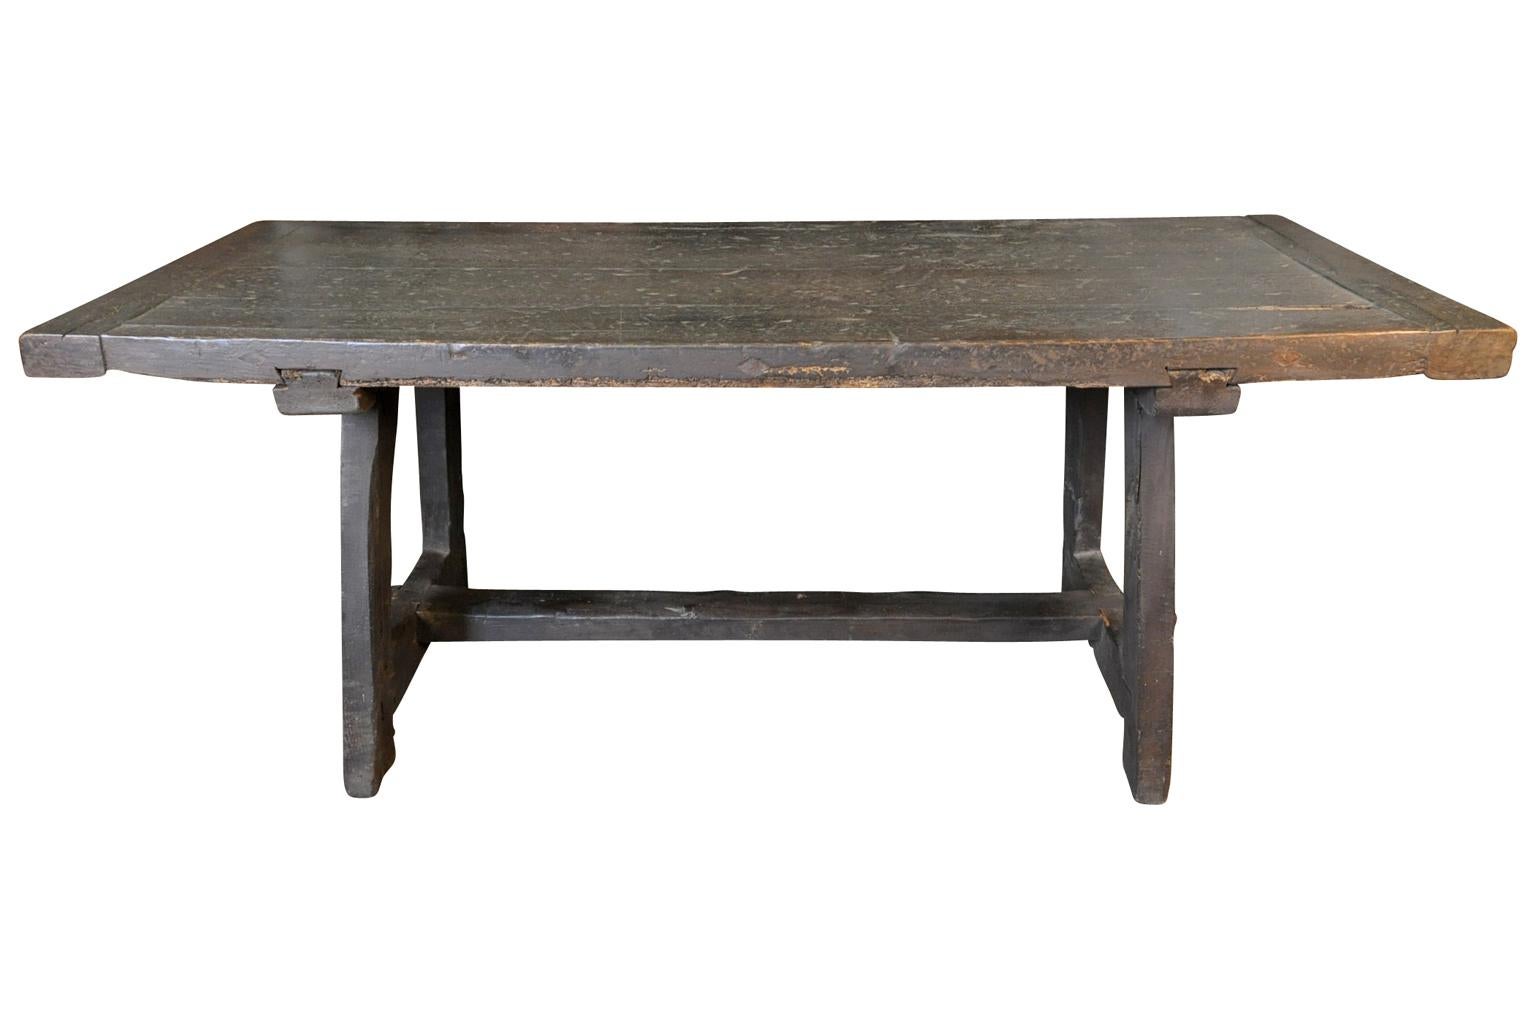 A very beautiful, Primitive farm table - trestle table from Northern Italy. Wonderfully and sturdily constructed from darkly stained massive oak. Wonderful not only as a dining table, but as a console, writing table or serving table as well.